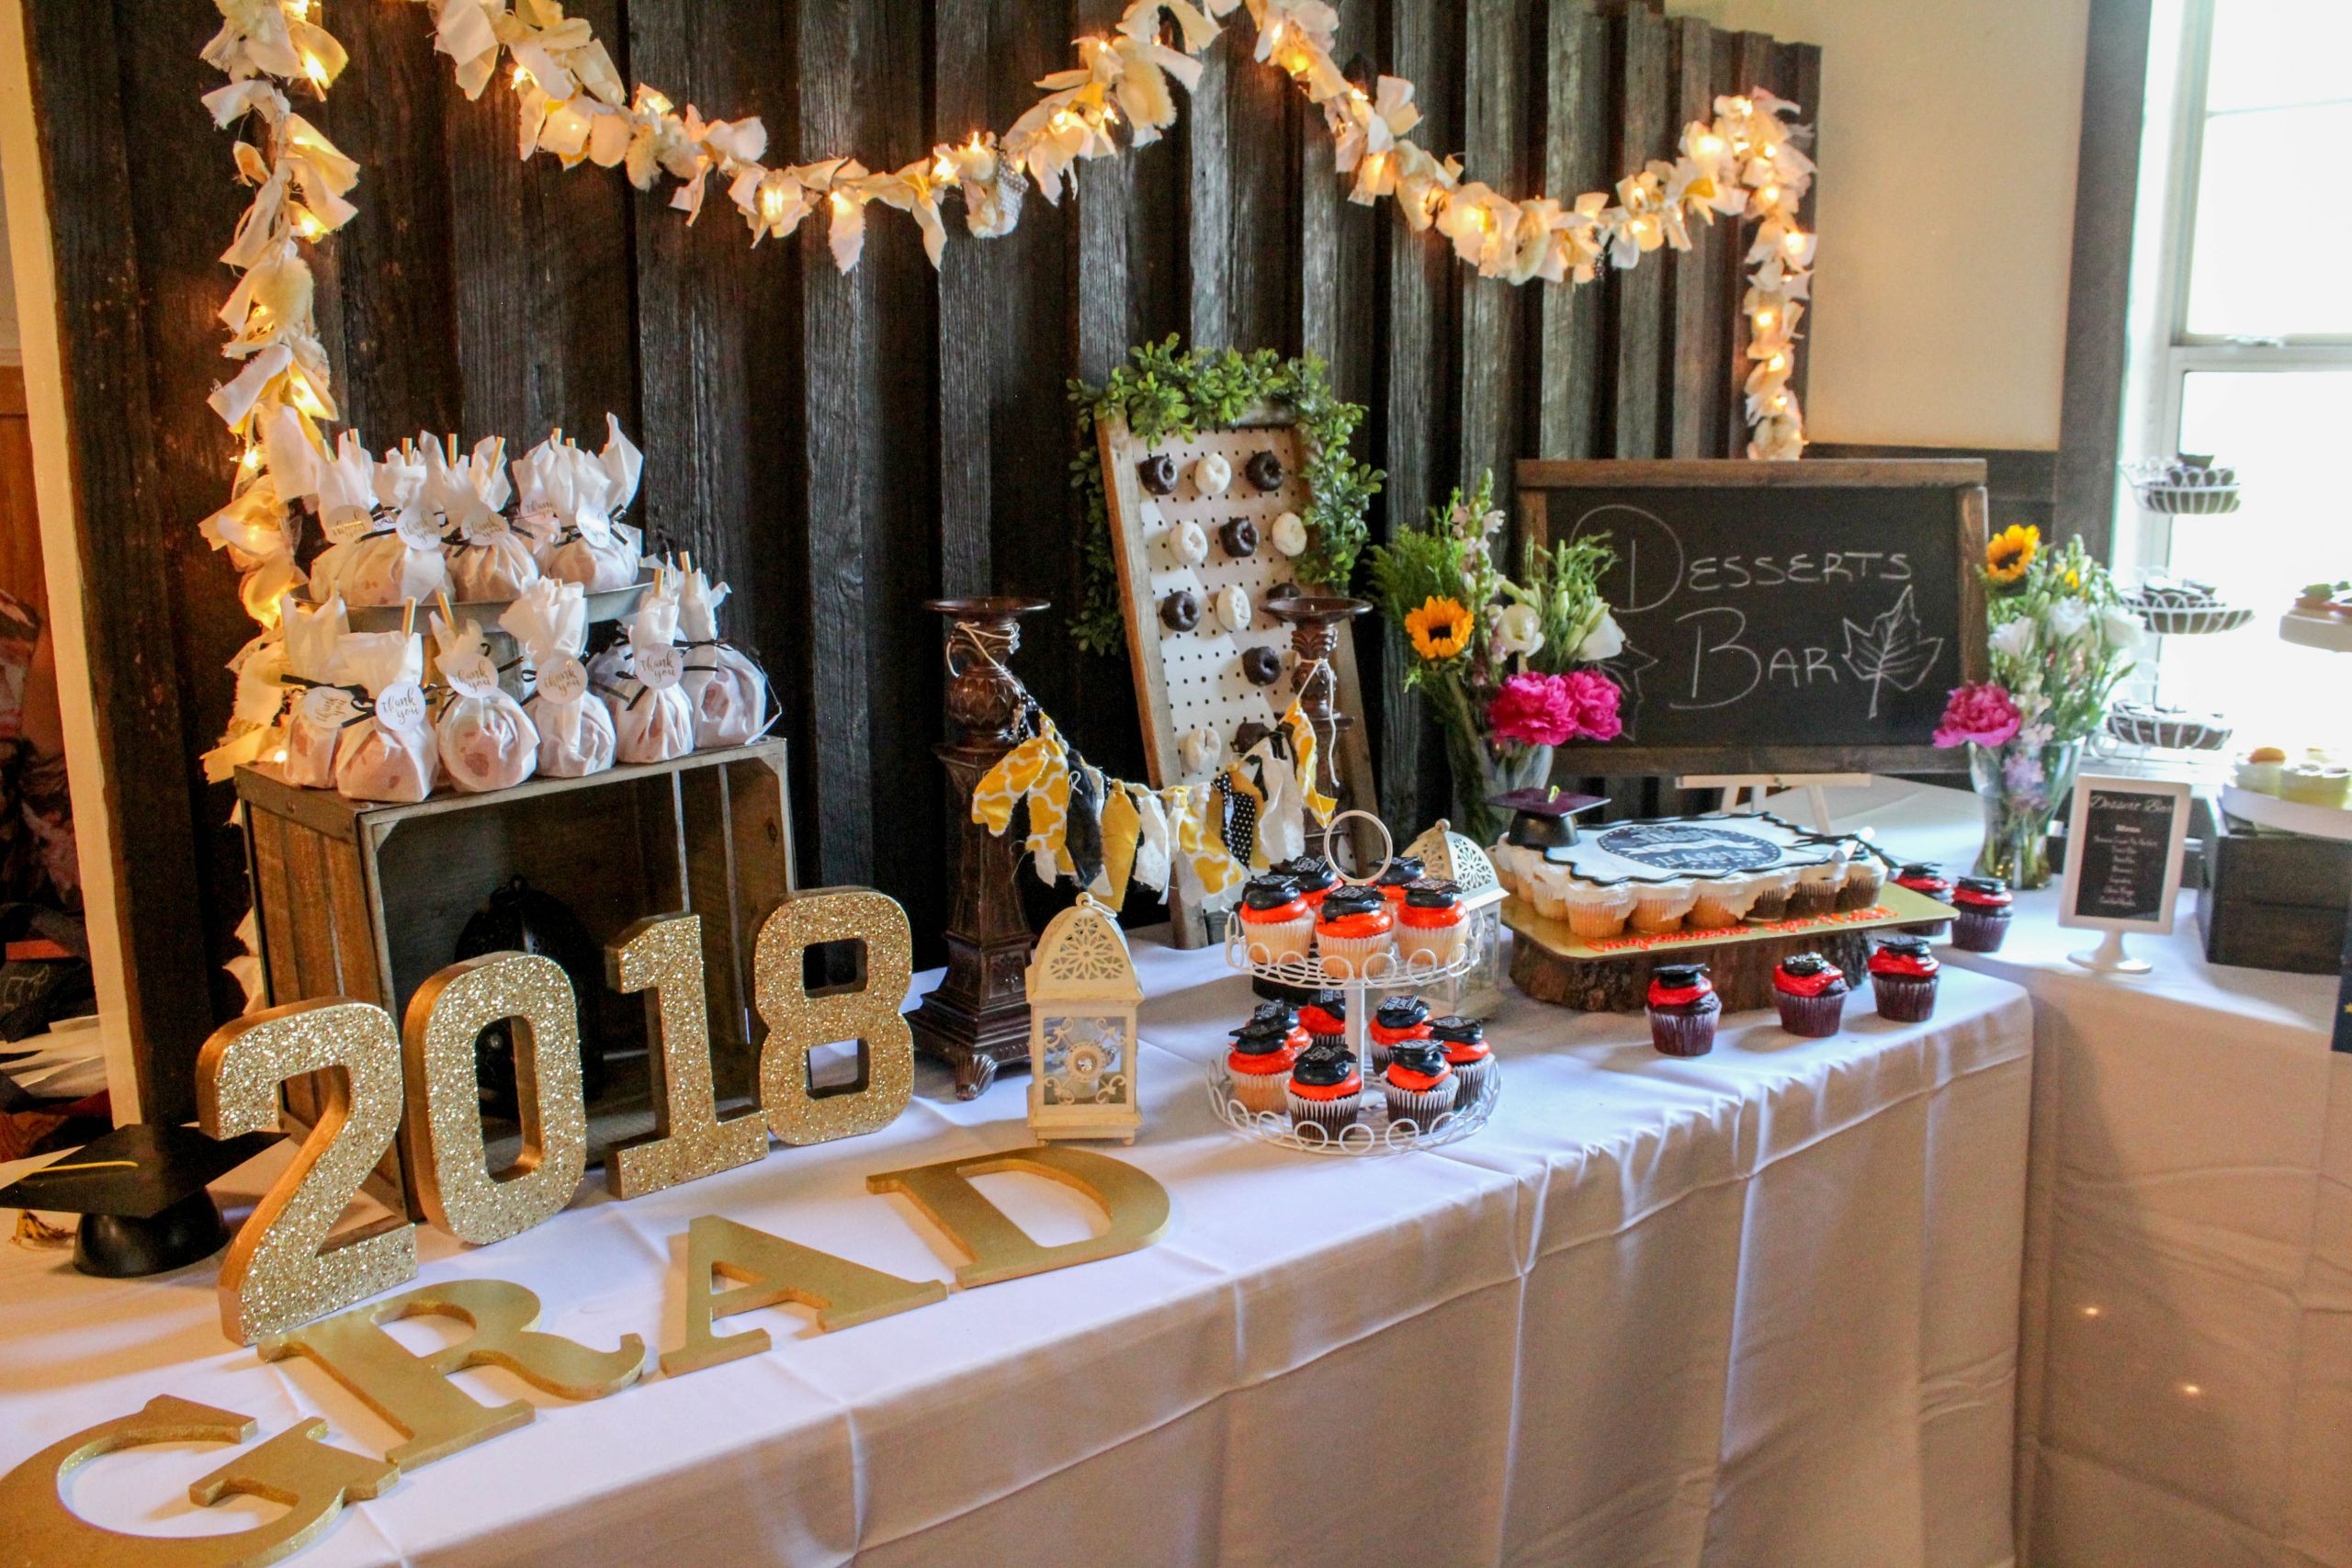 Graduation Party Ideas For Girls
 Graduation Party Ideas addicted to recipes